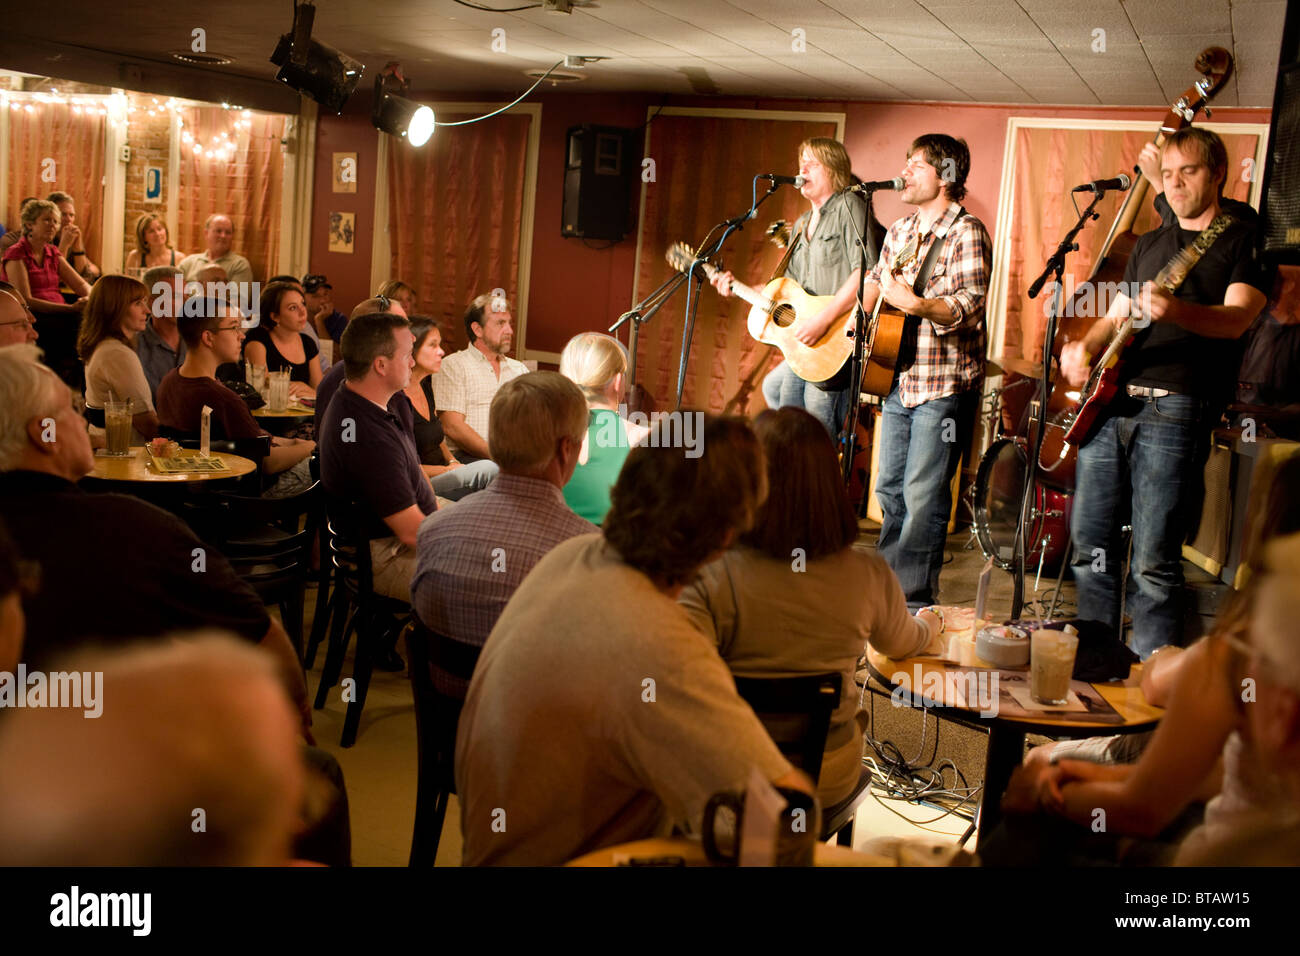 An alt country band plays in the intimate Caffe Lena, Saratoga Springs, New York Stock Photo